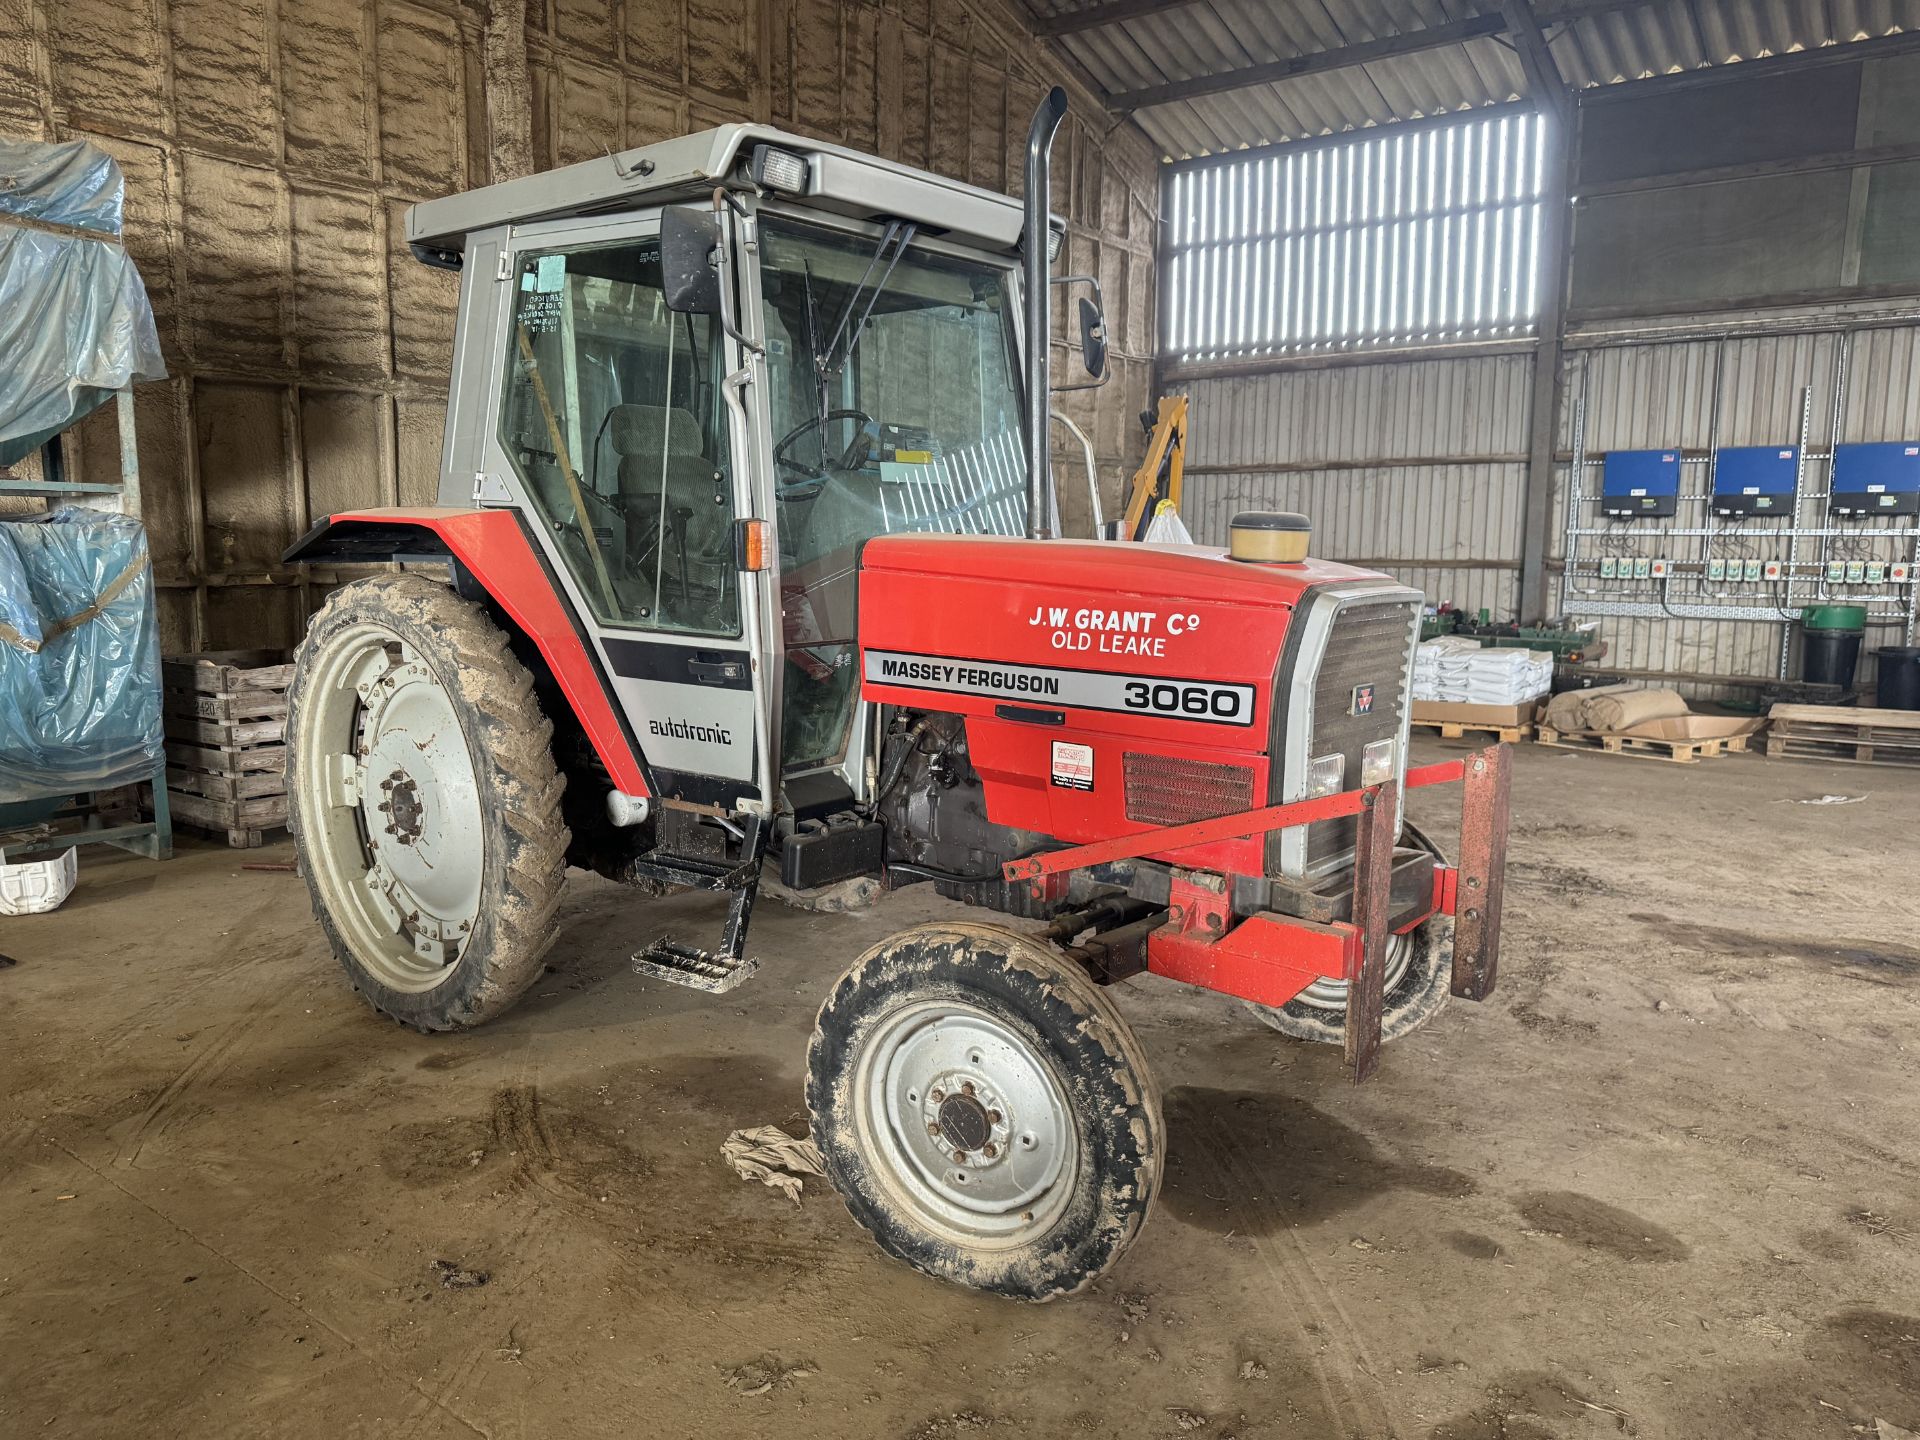 (93) Massey Ferguson 3060 autotronic 2WD tractor Goodyear 13.6 R38, 11,400 hrs, Reg L741 RCT - Image 2 of 3